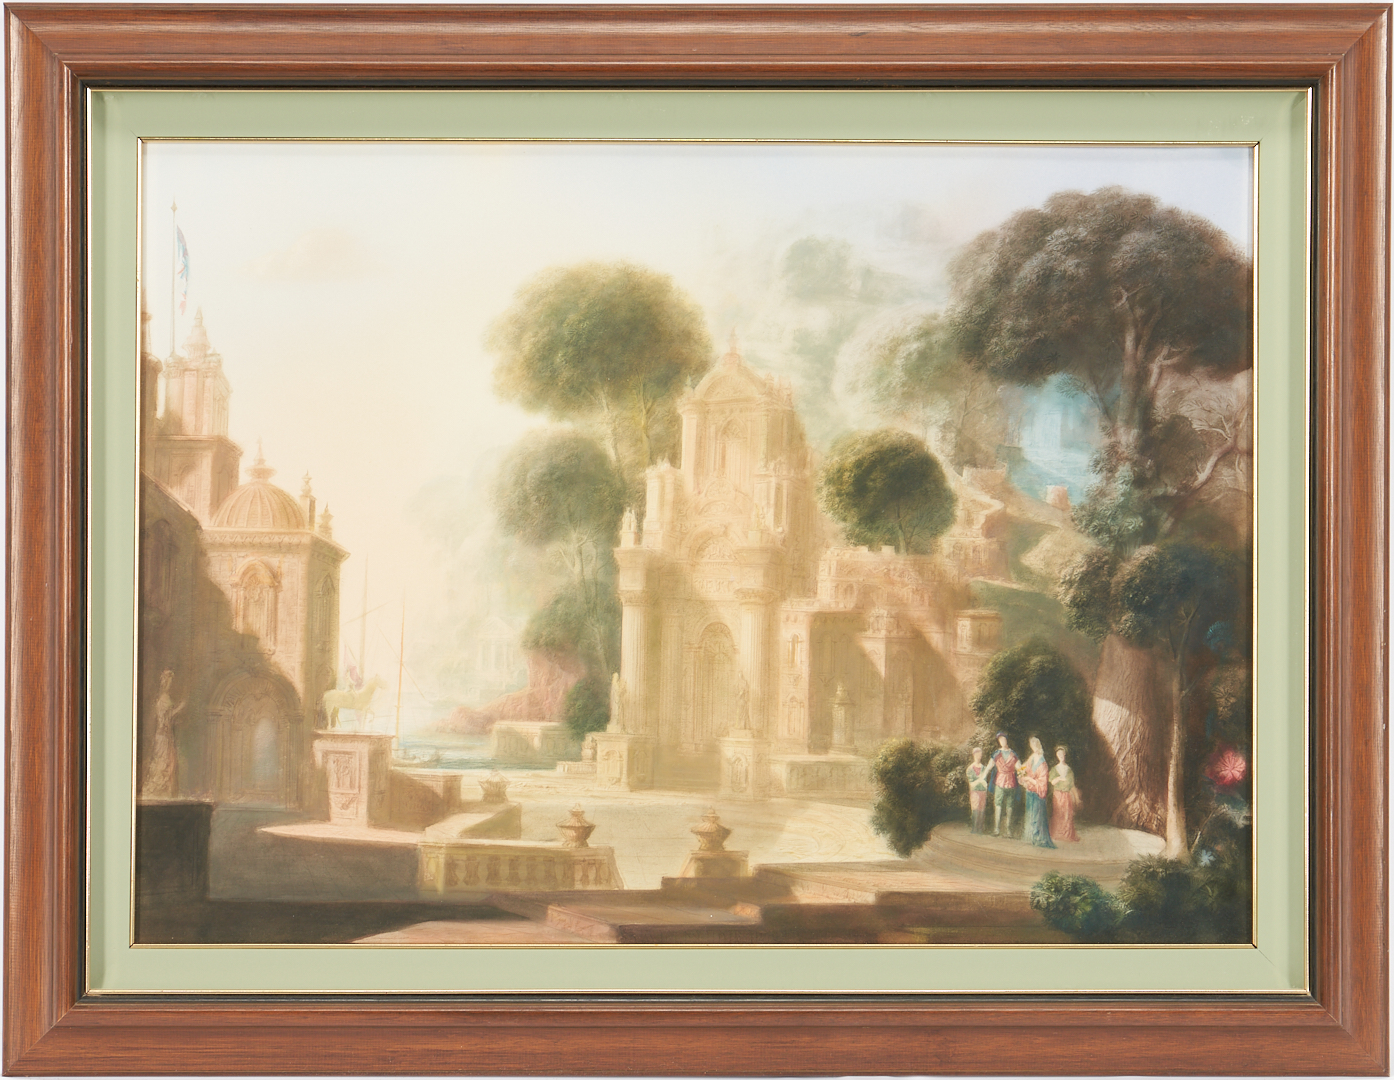 Lot 391: H. Hitchcock watercolor painting, The Shrine of St. Francis